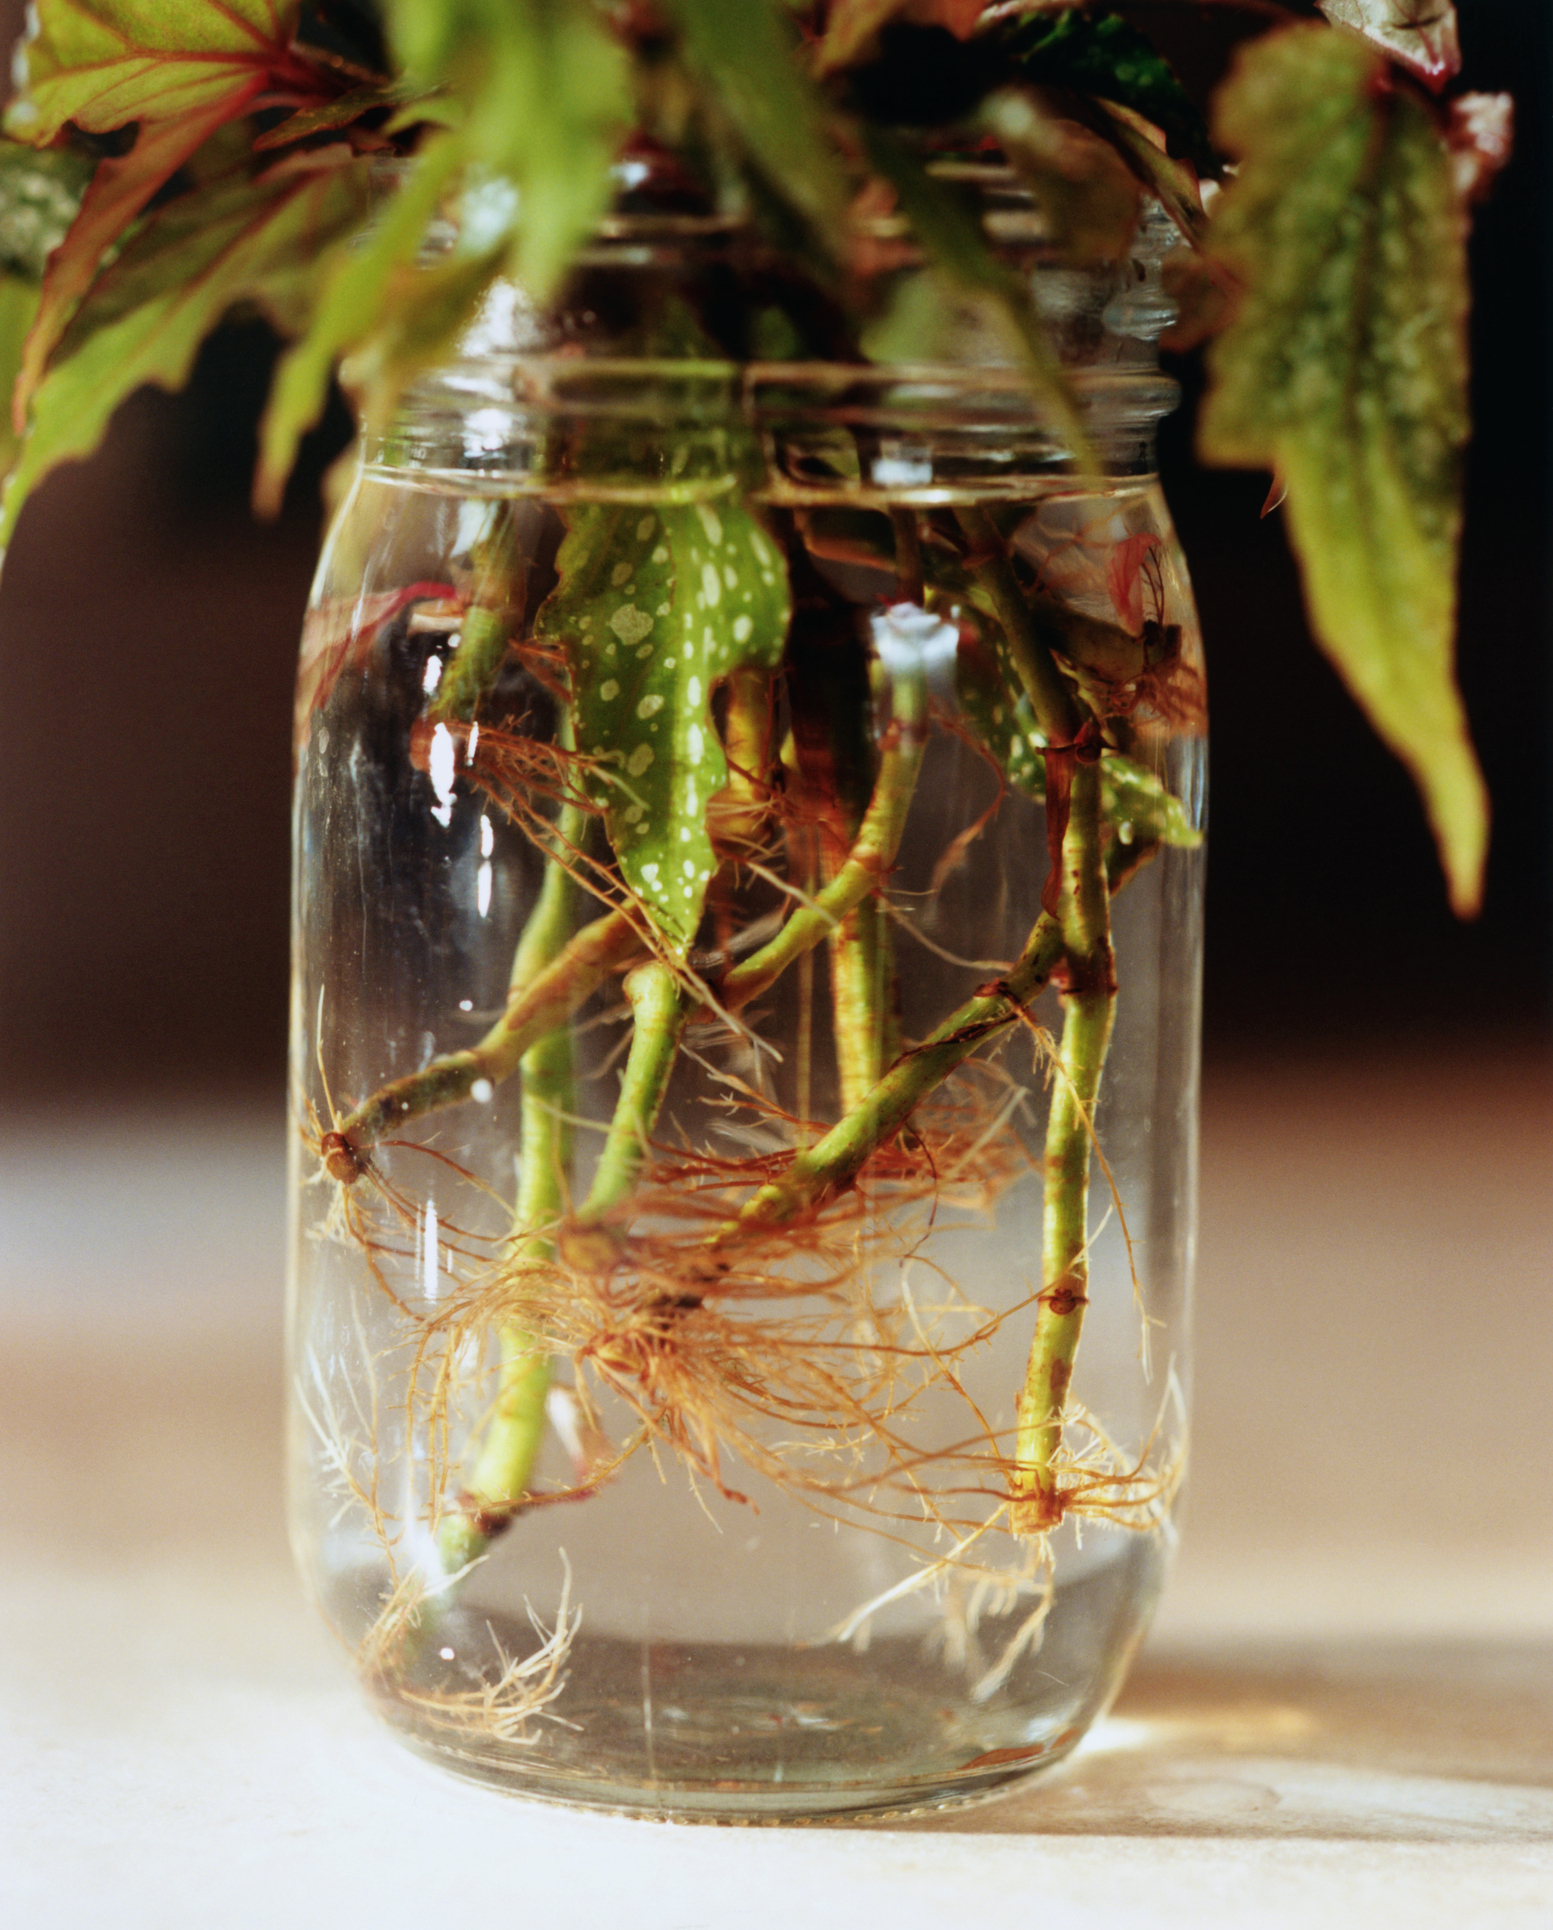 Roots of plant growing in jar, close-up